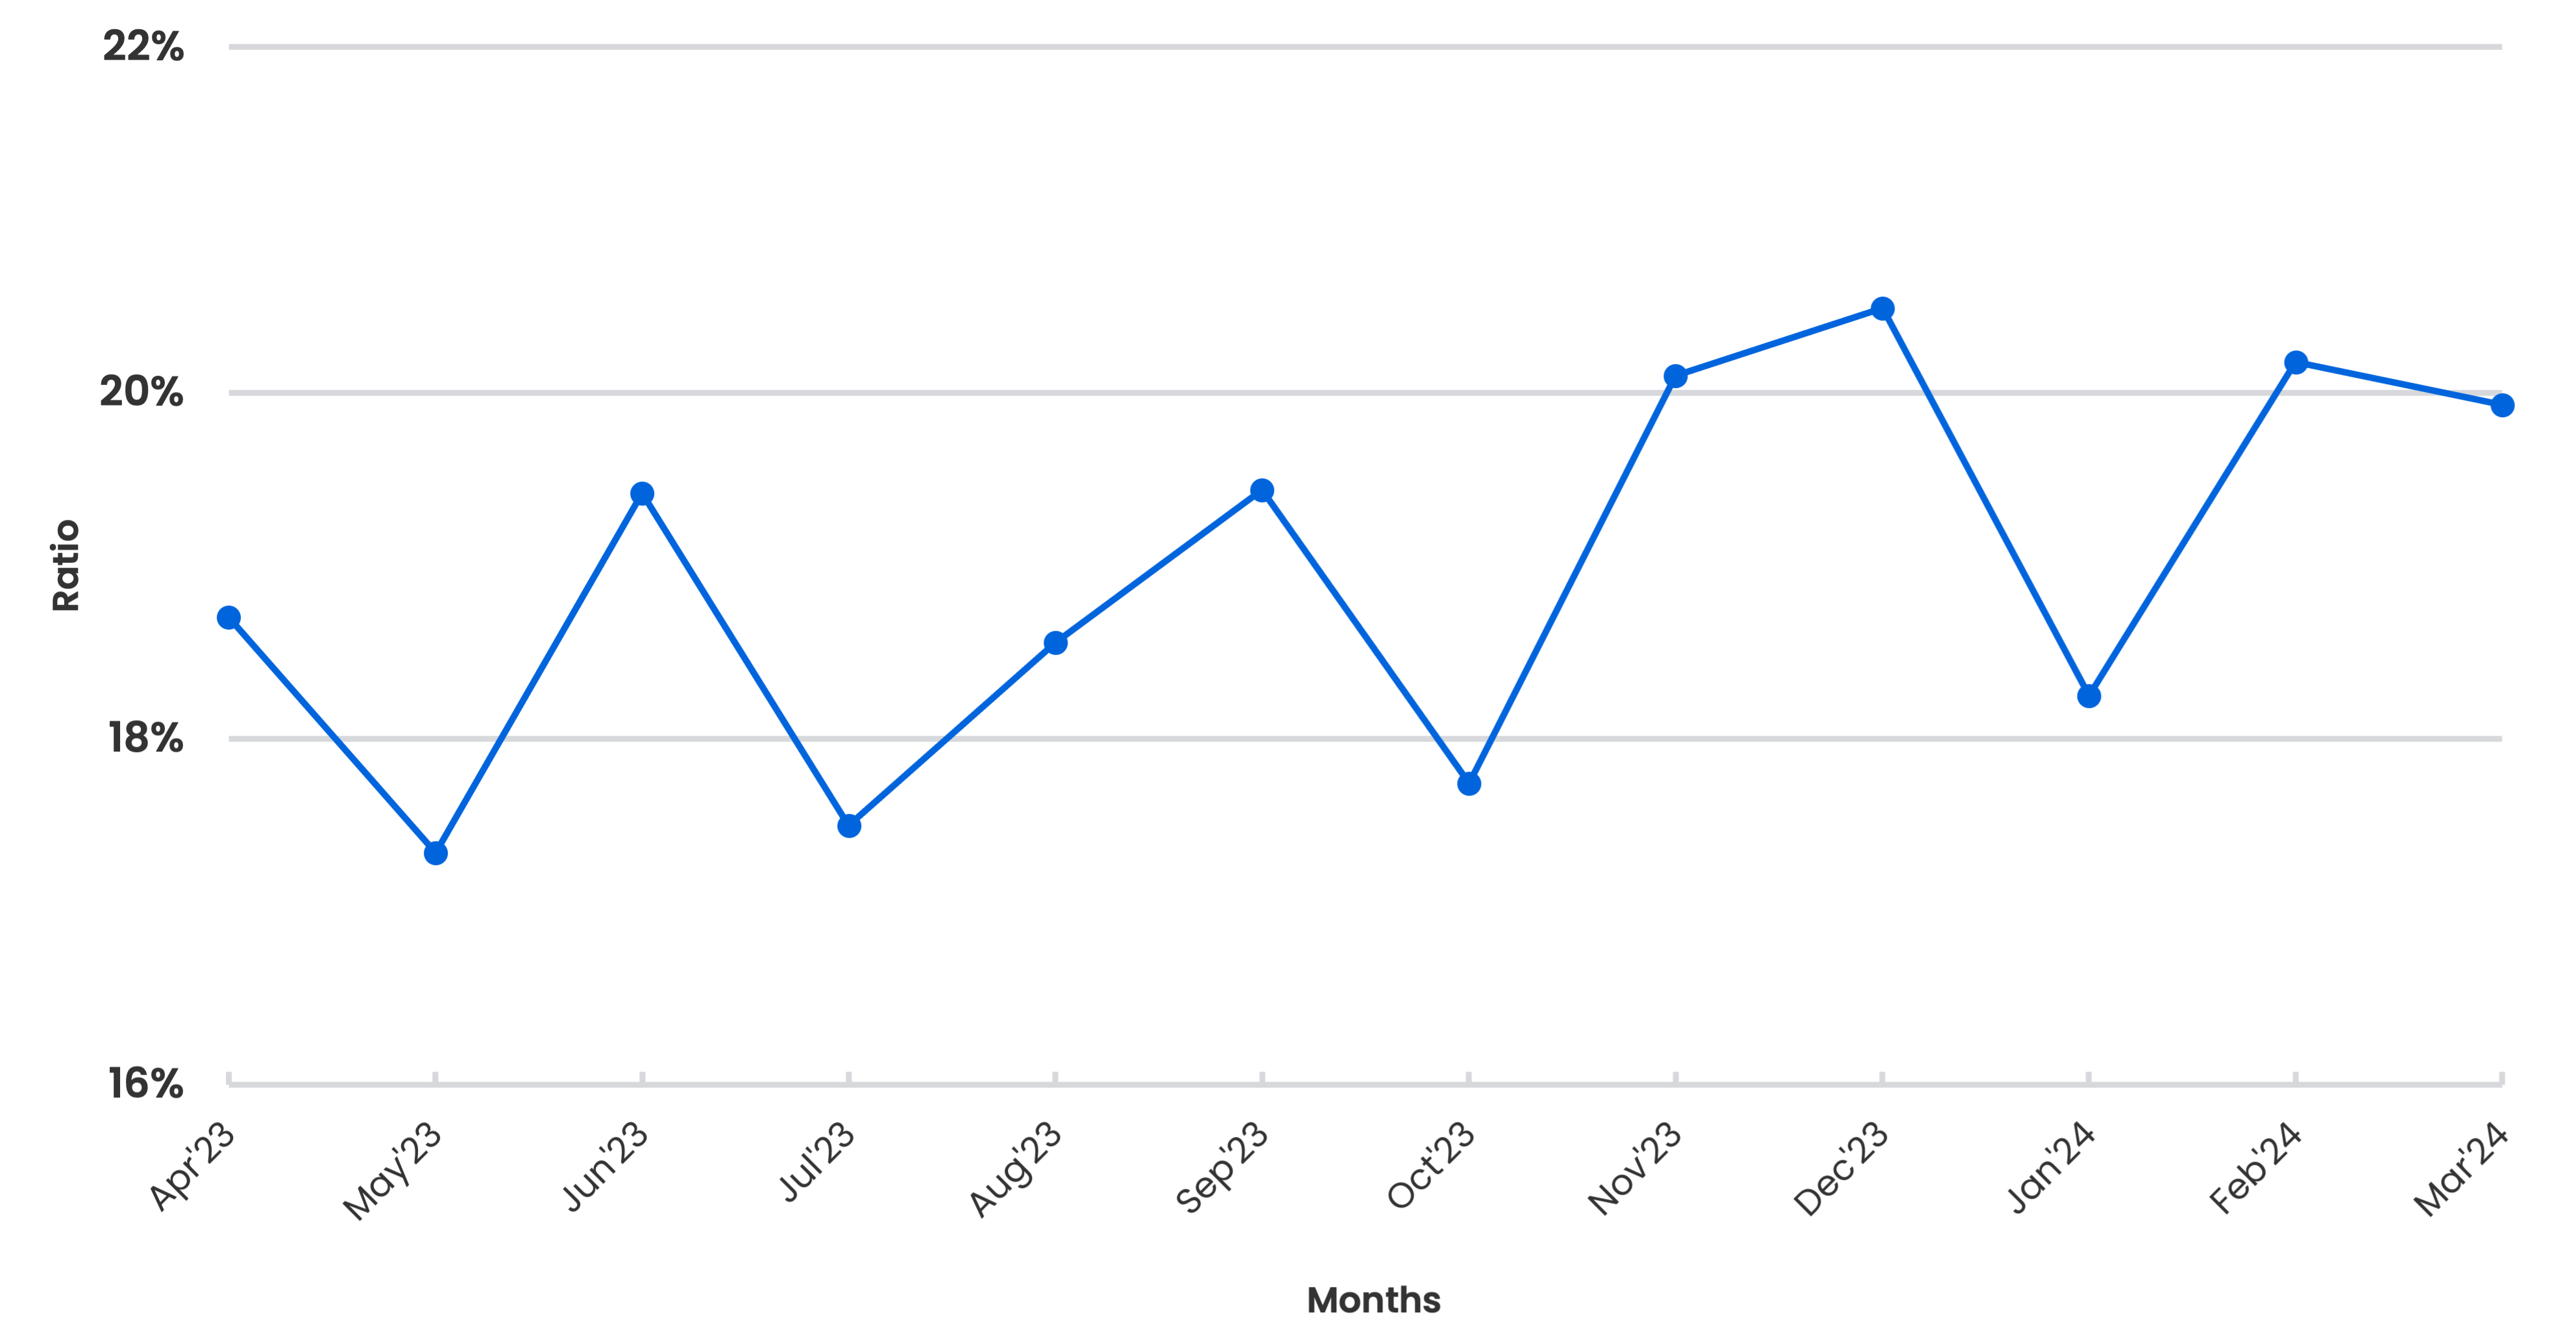 Line graph showing the payroll-to-expense ratio (Y-axis) reported by small businesses over time by months (X-axis). The line generally displays an upward trend, between a 17% and 22% payroll-to-expense ratio, over 12 months.